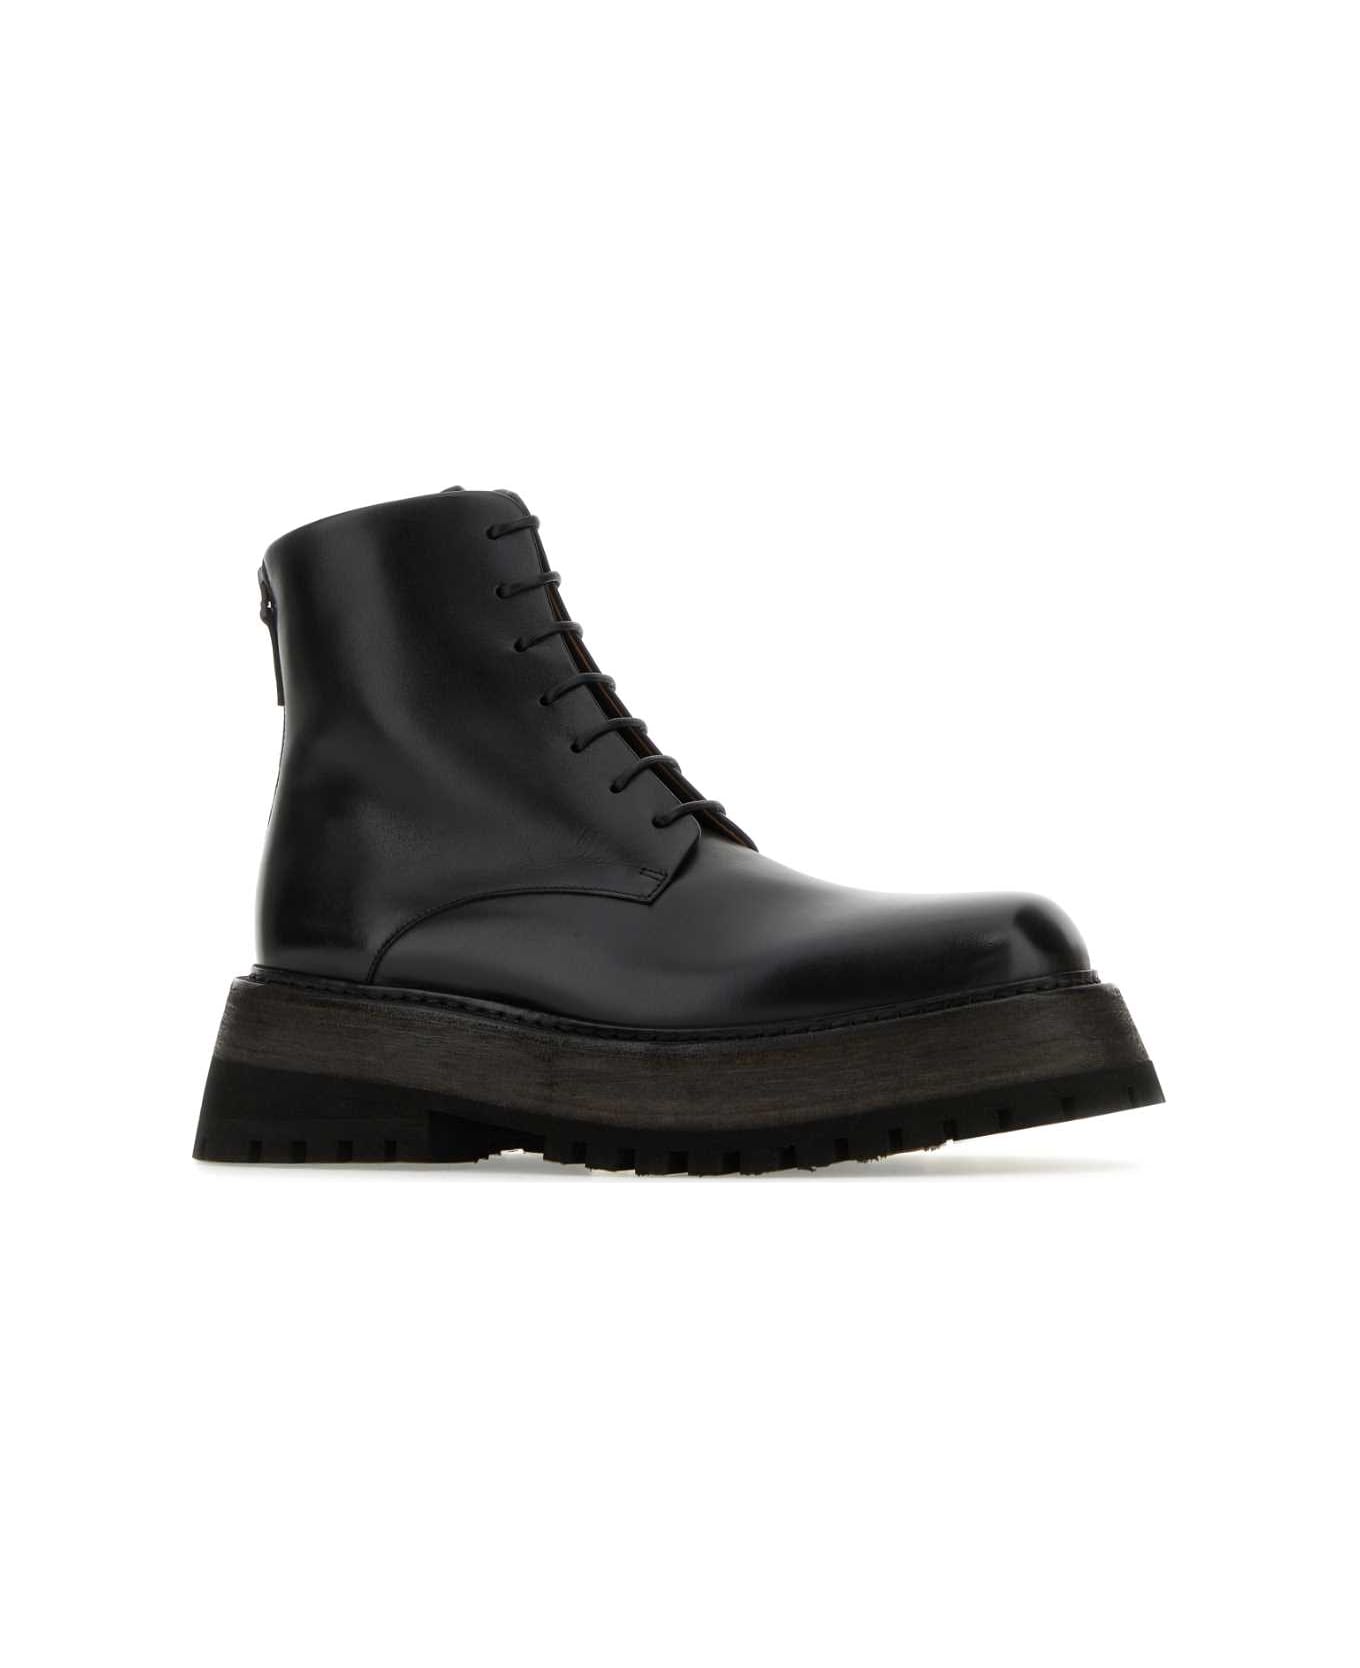 Marsell Black Leather Ankle Boots - BLACK